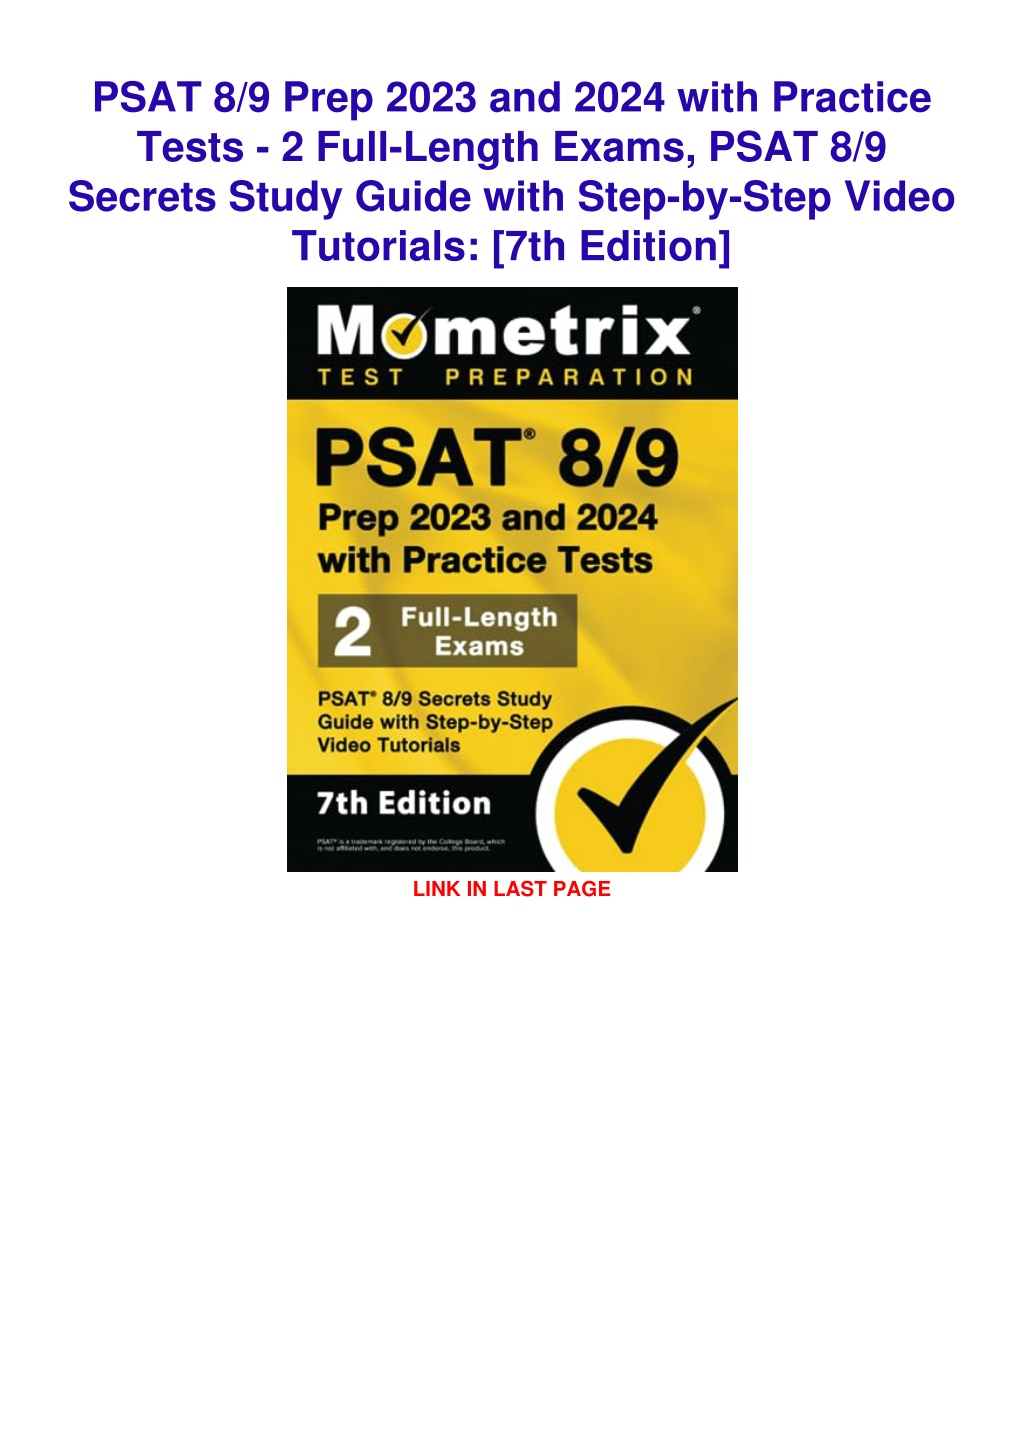 PPT [PDF READ ONLINE] PSAT 8/9 Prep 2023 and 2024 with Practice Tests